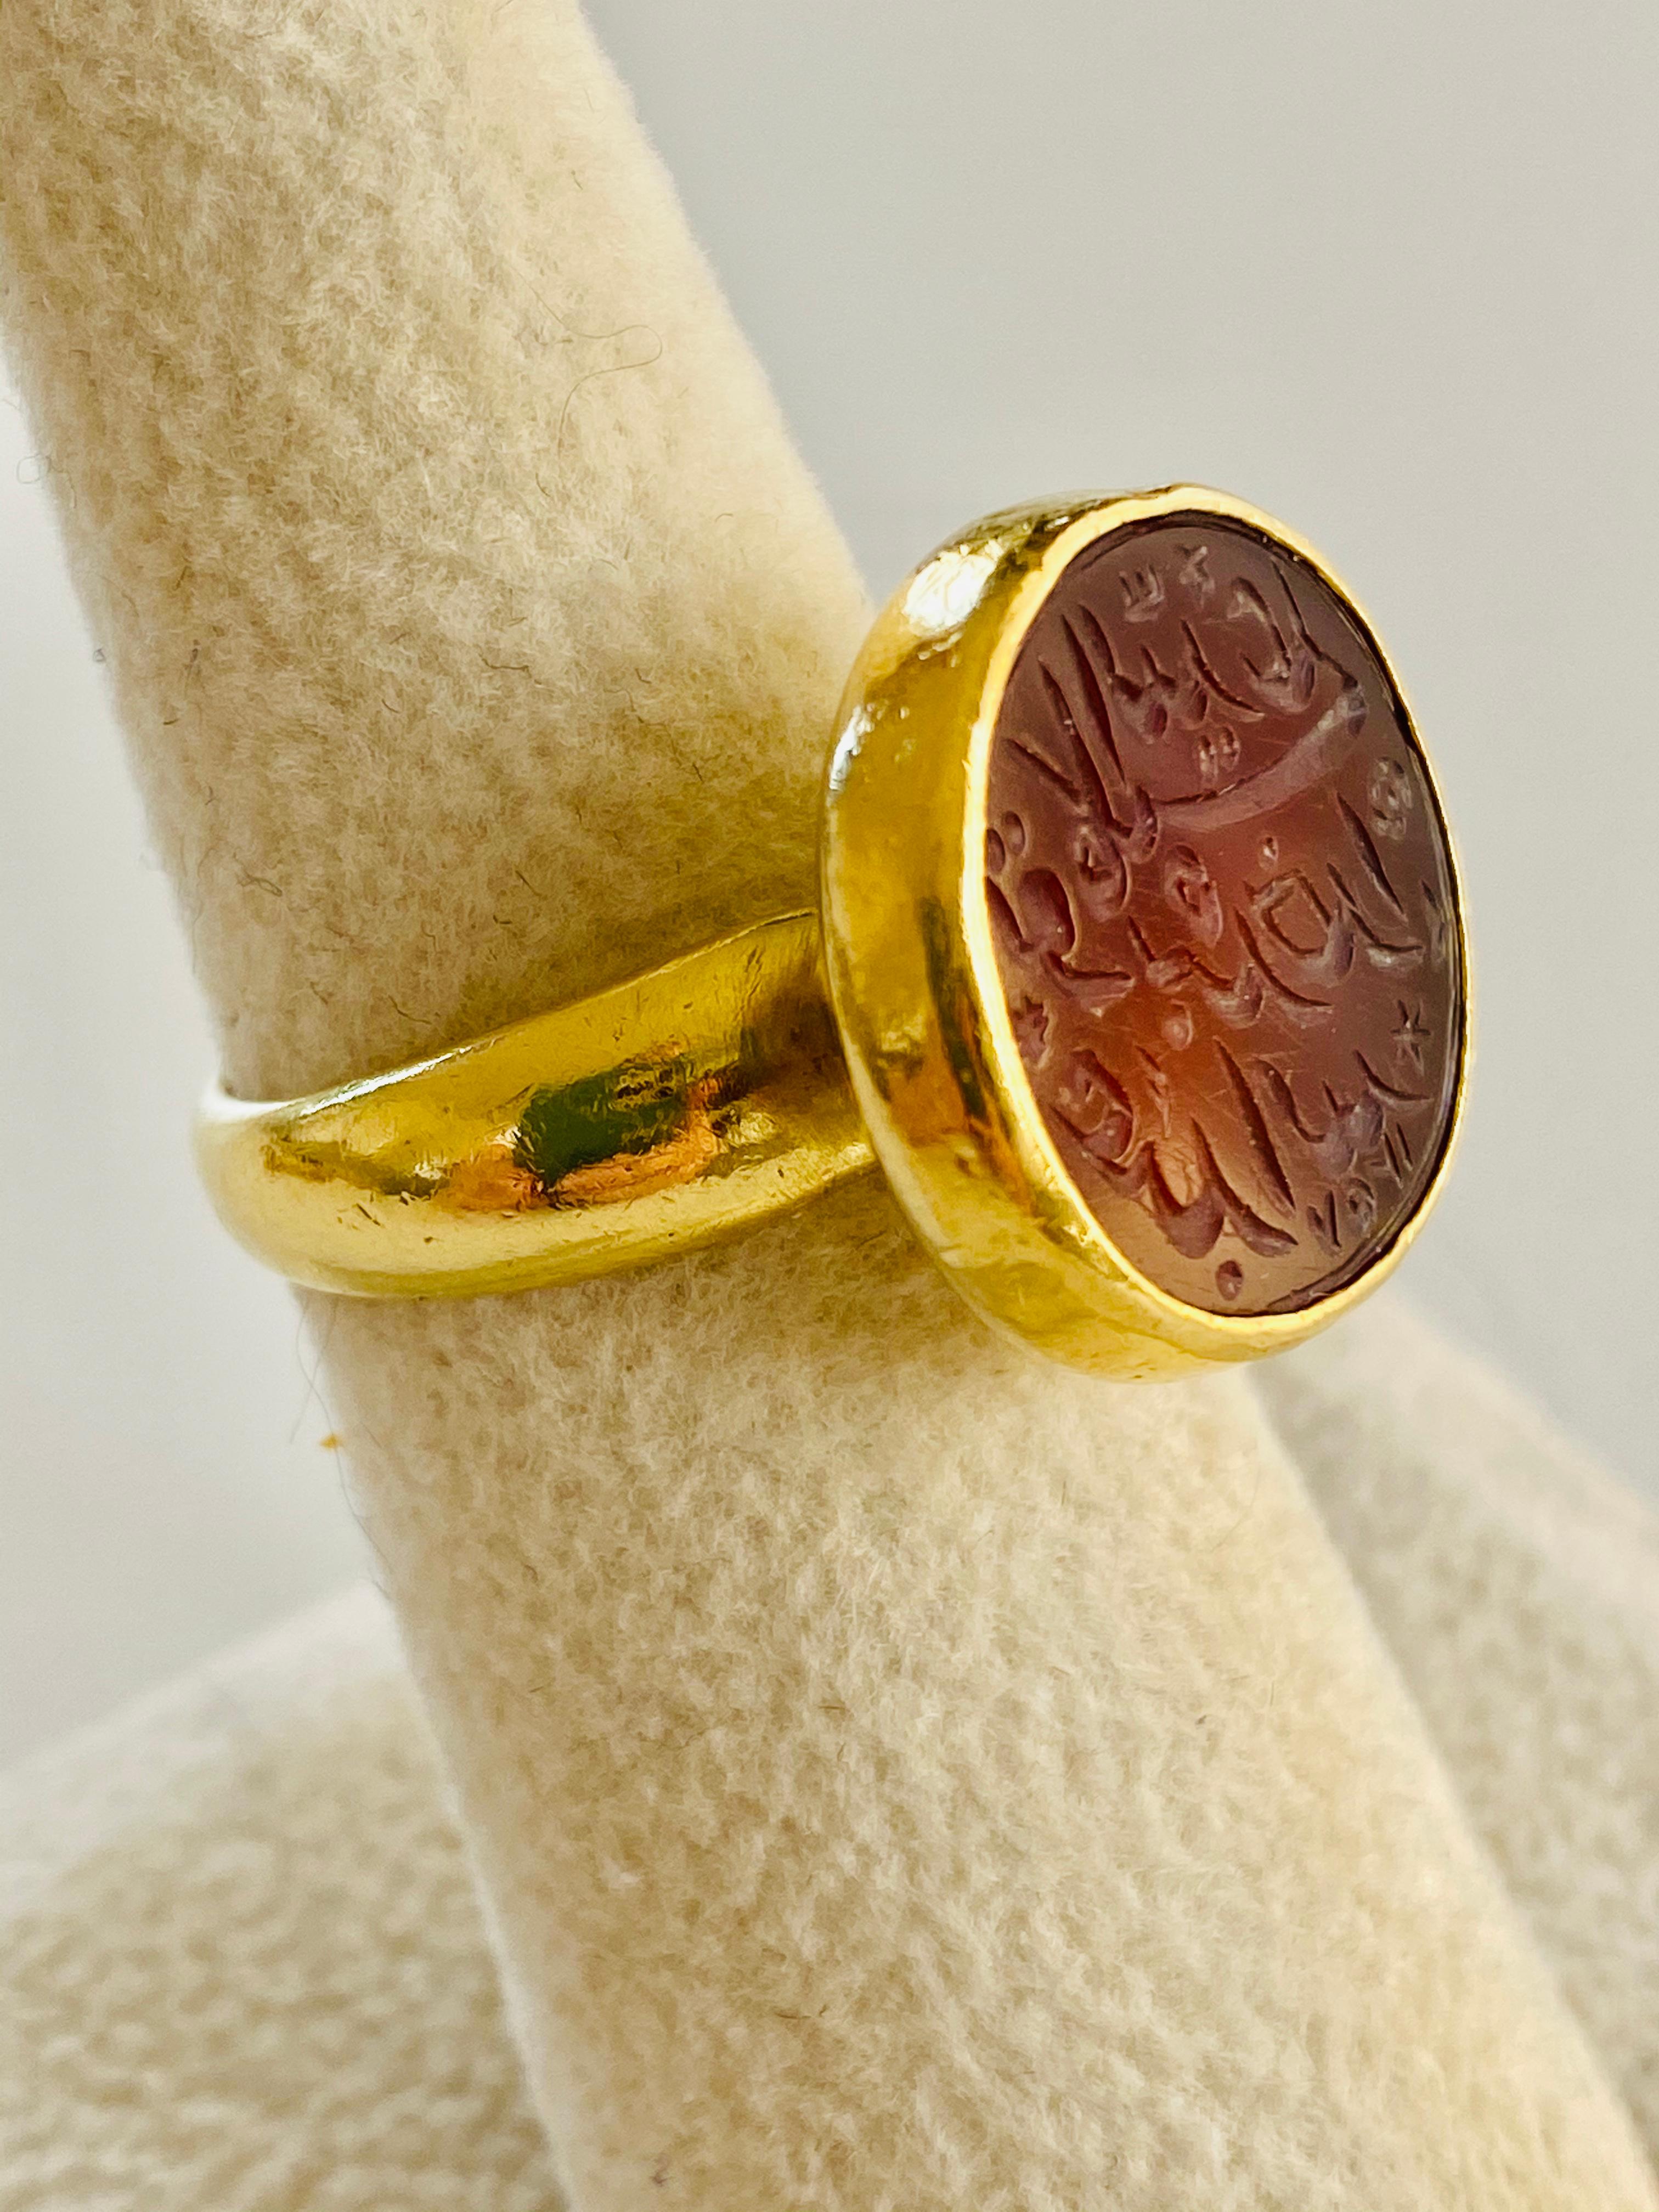 This intaglio-cut carnelian Arabic seal is from the 18th Century and was set in an 18k custom made casting in the early 2000's.

Stone: Carnelian, Chalcedony.
Stone Size With Bezel Setting: Approximately 11/16